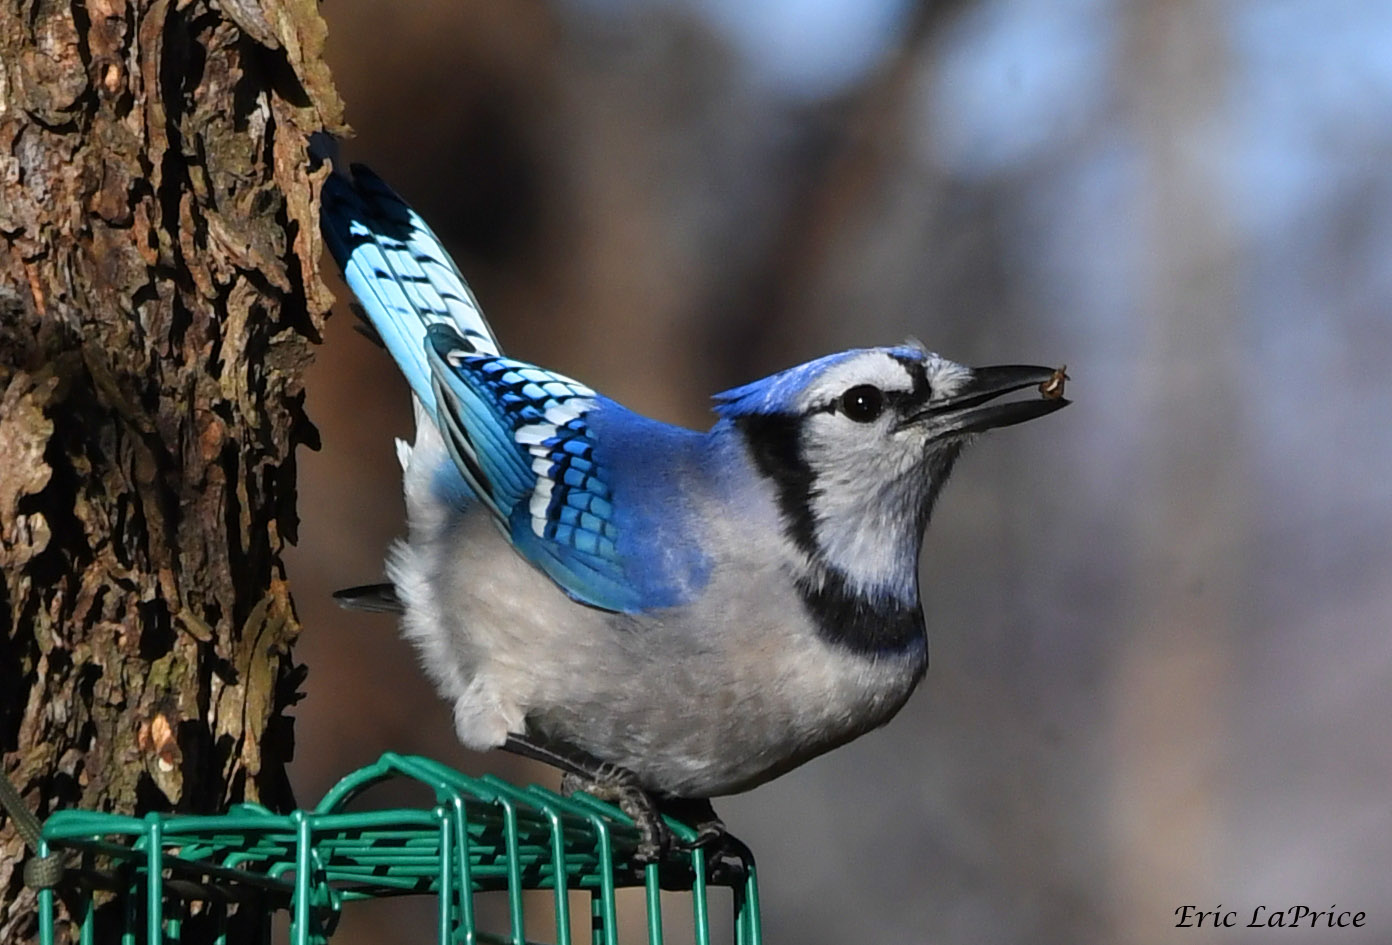 Bird with bright blue wings and a feather crest perches atop a feeder attached to a tree trunk. Black-edged, light grey face with round black eye. The blue jay grips a seed in its black beak.